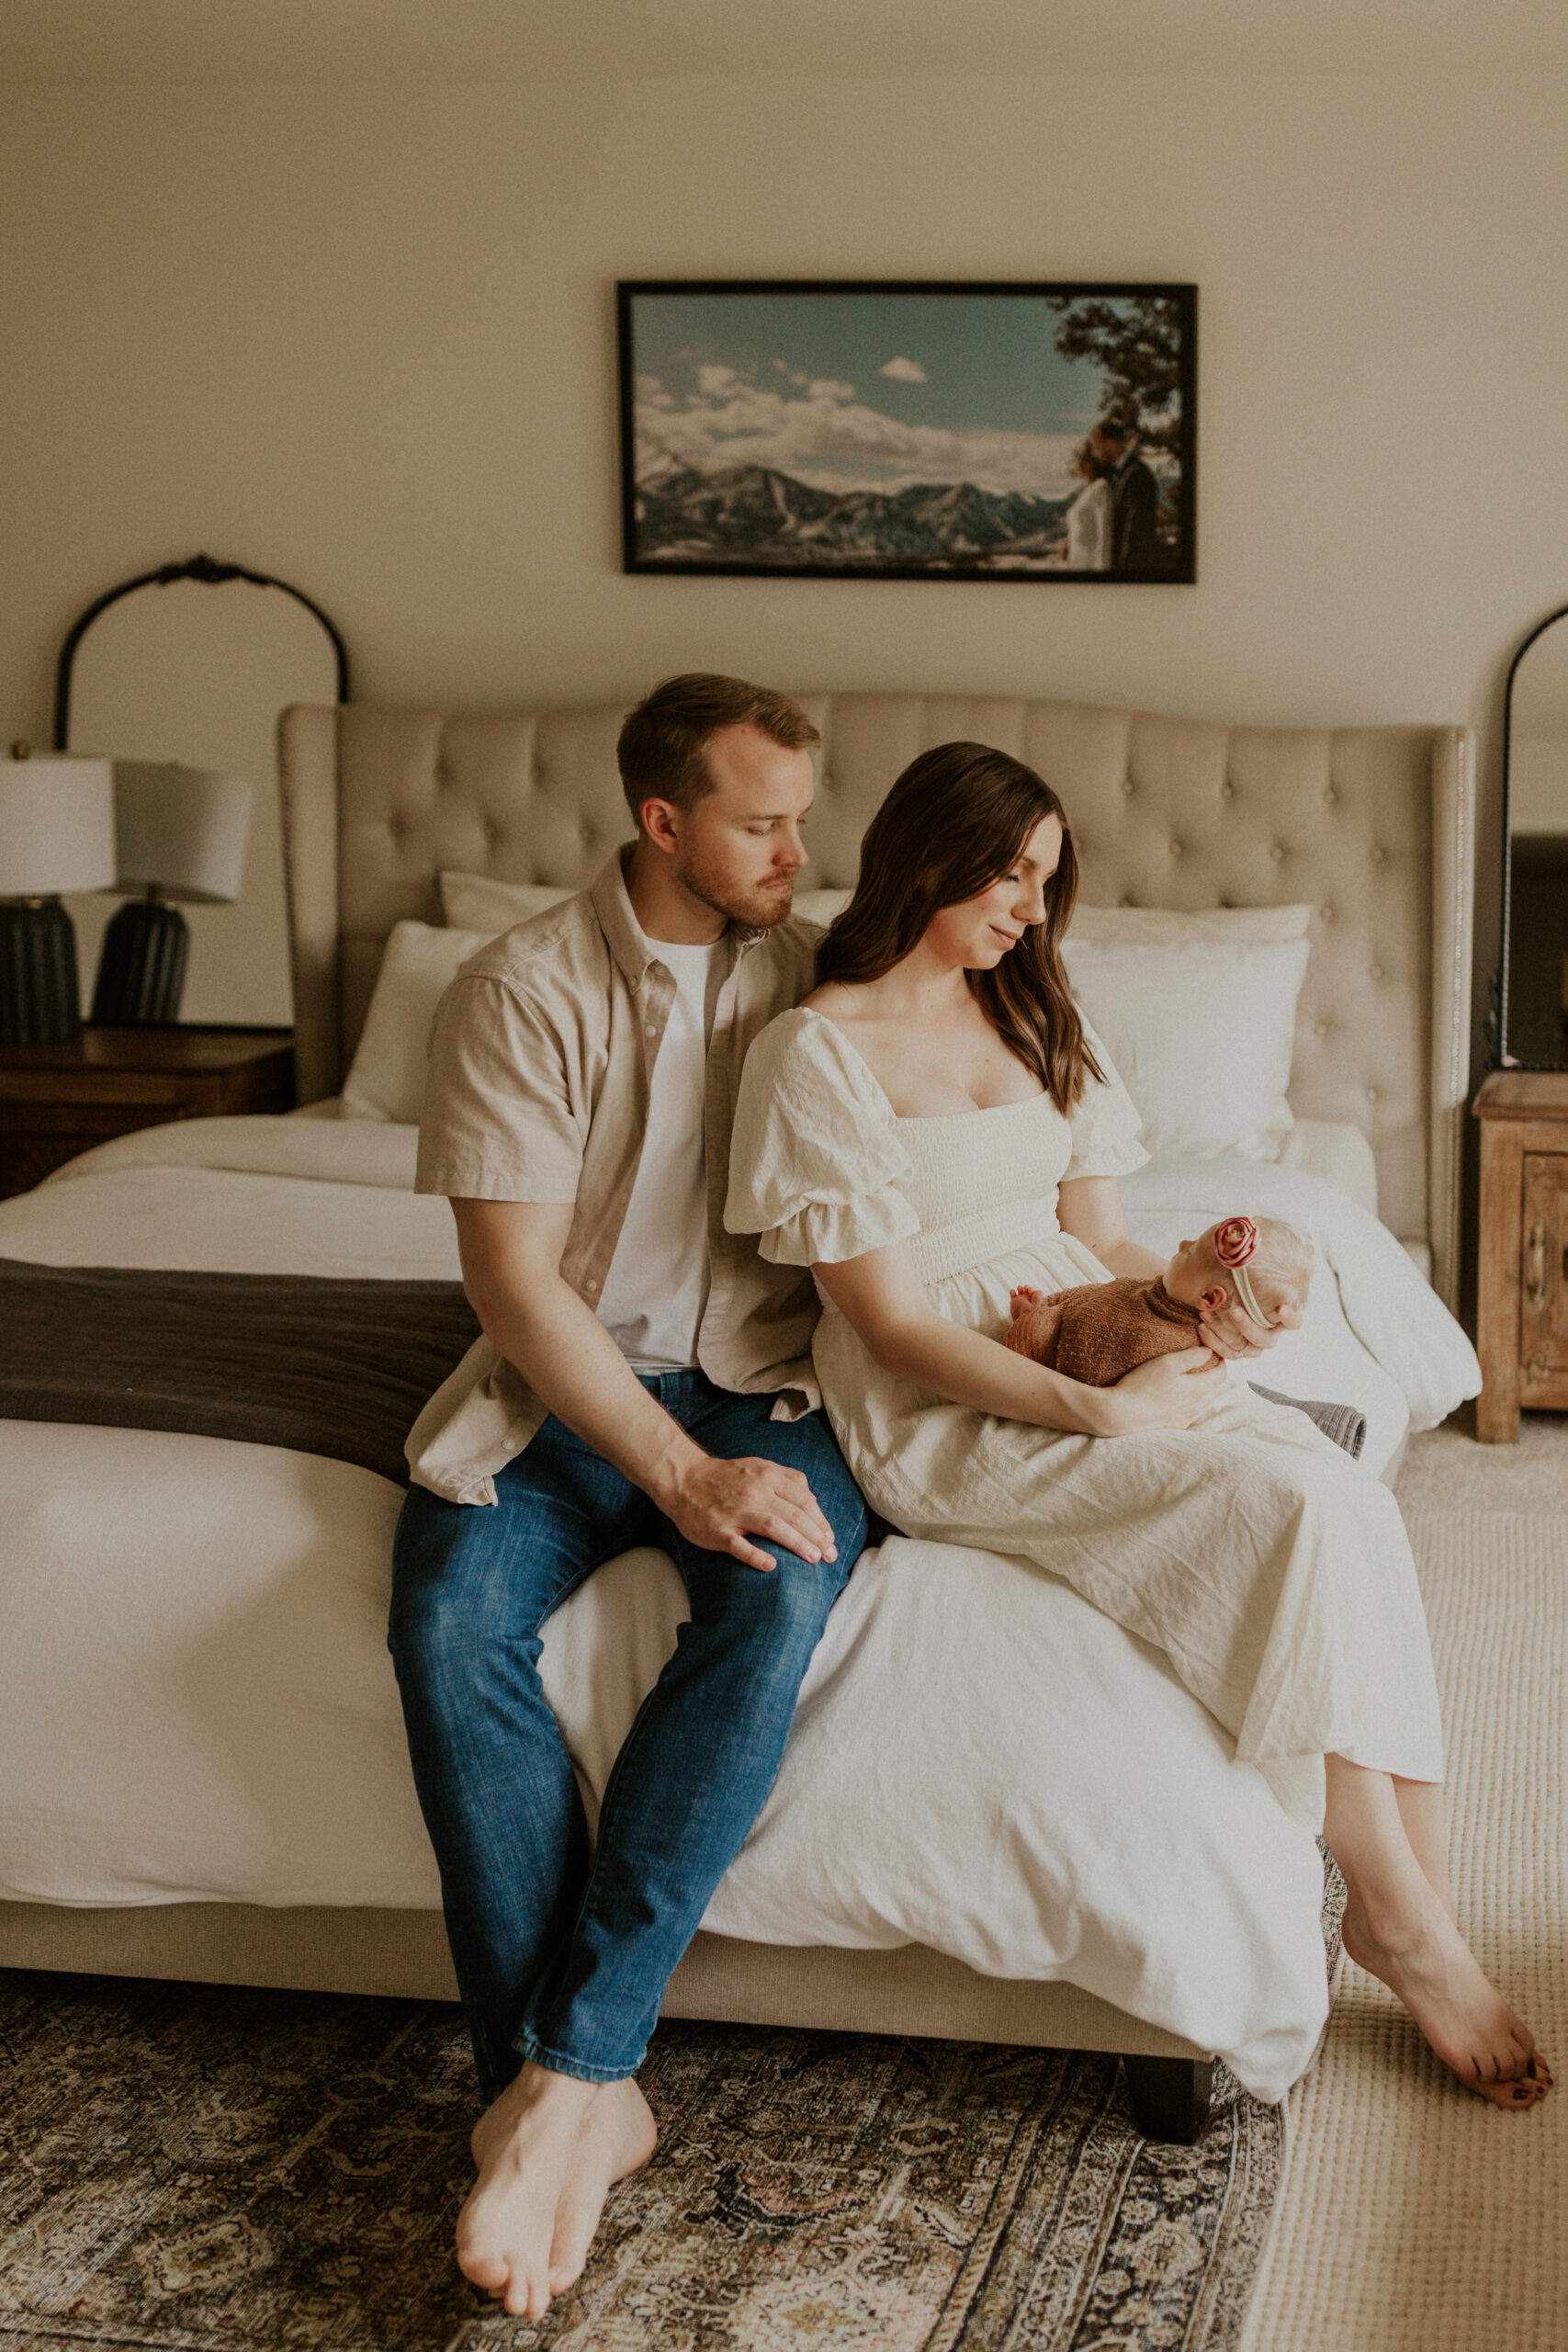 The Garner family's cozy newborn lifestyle session in their home in Colorado Springs, Colorado.